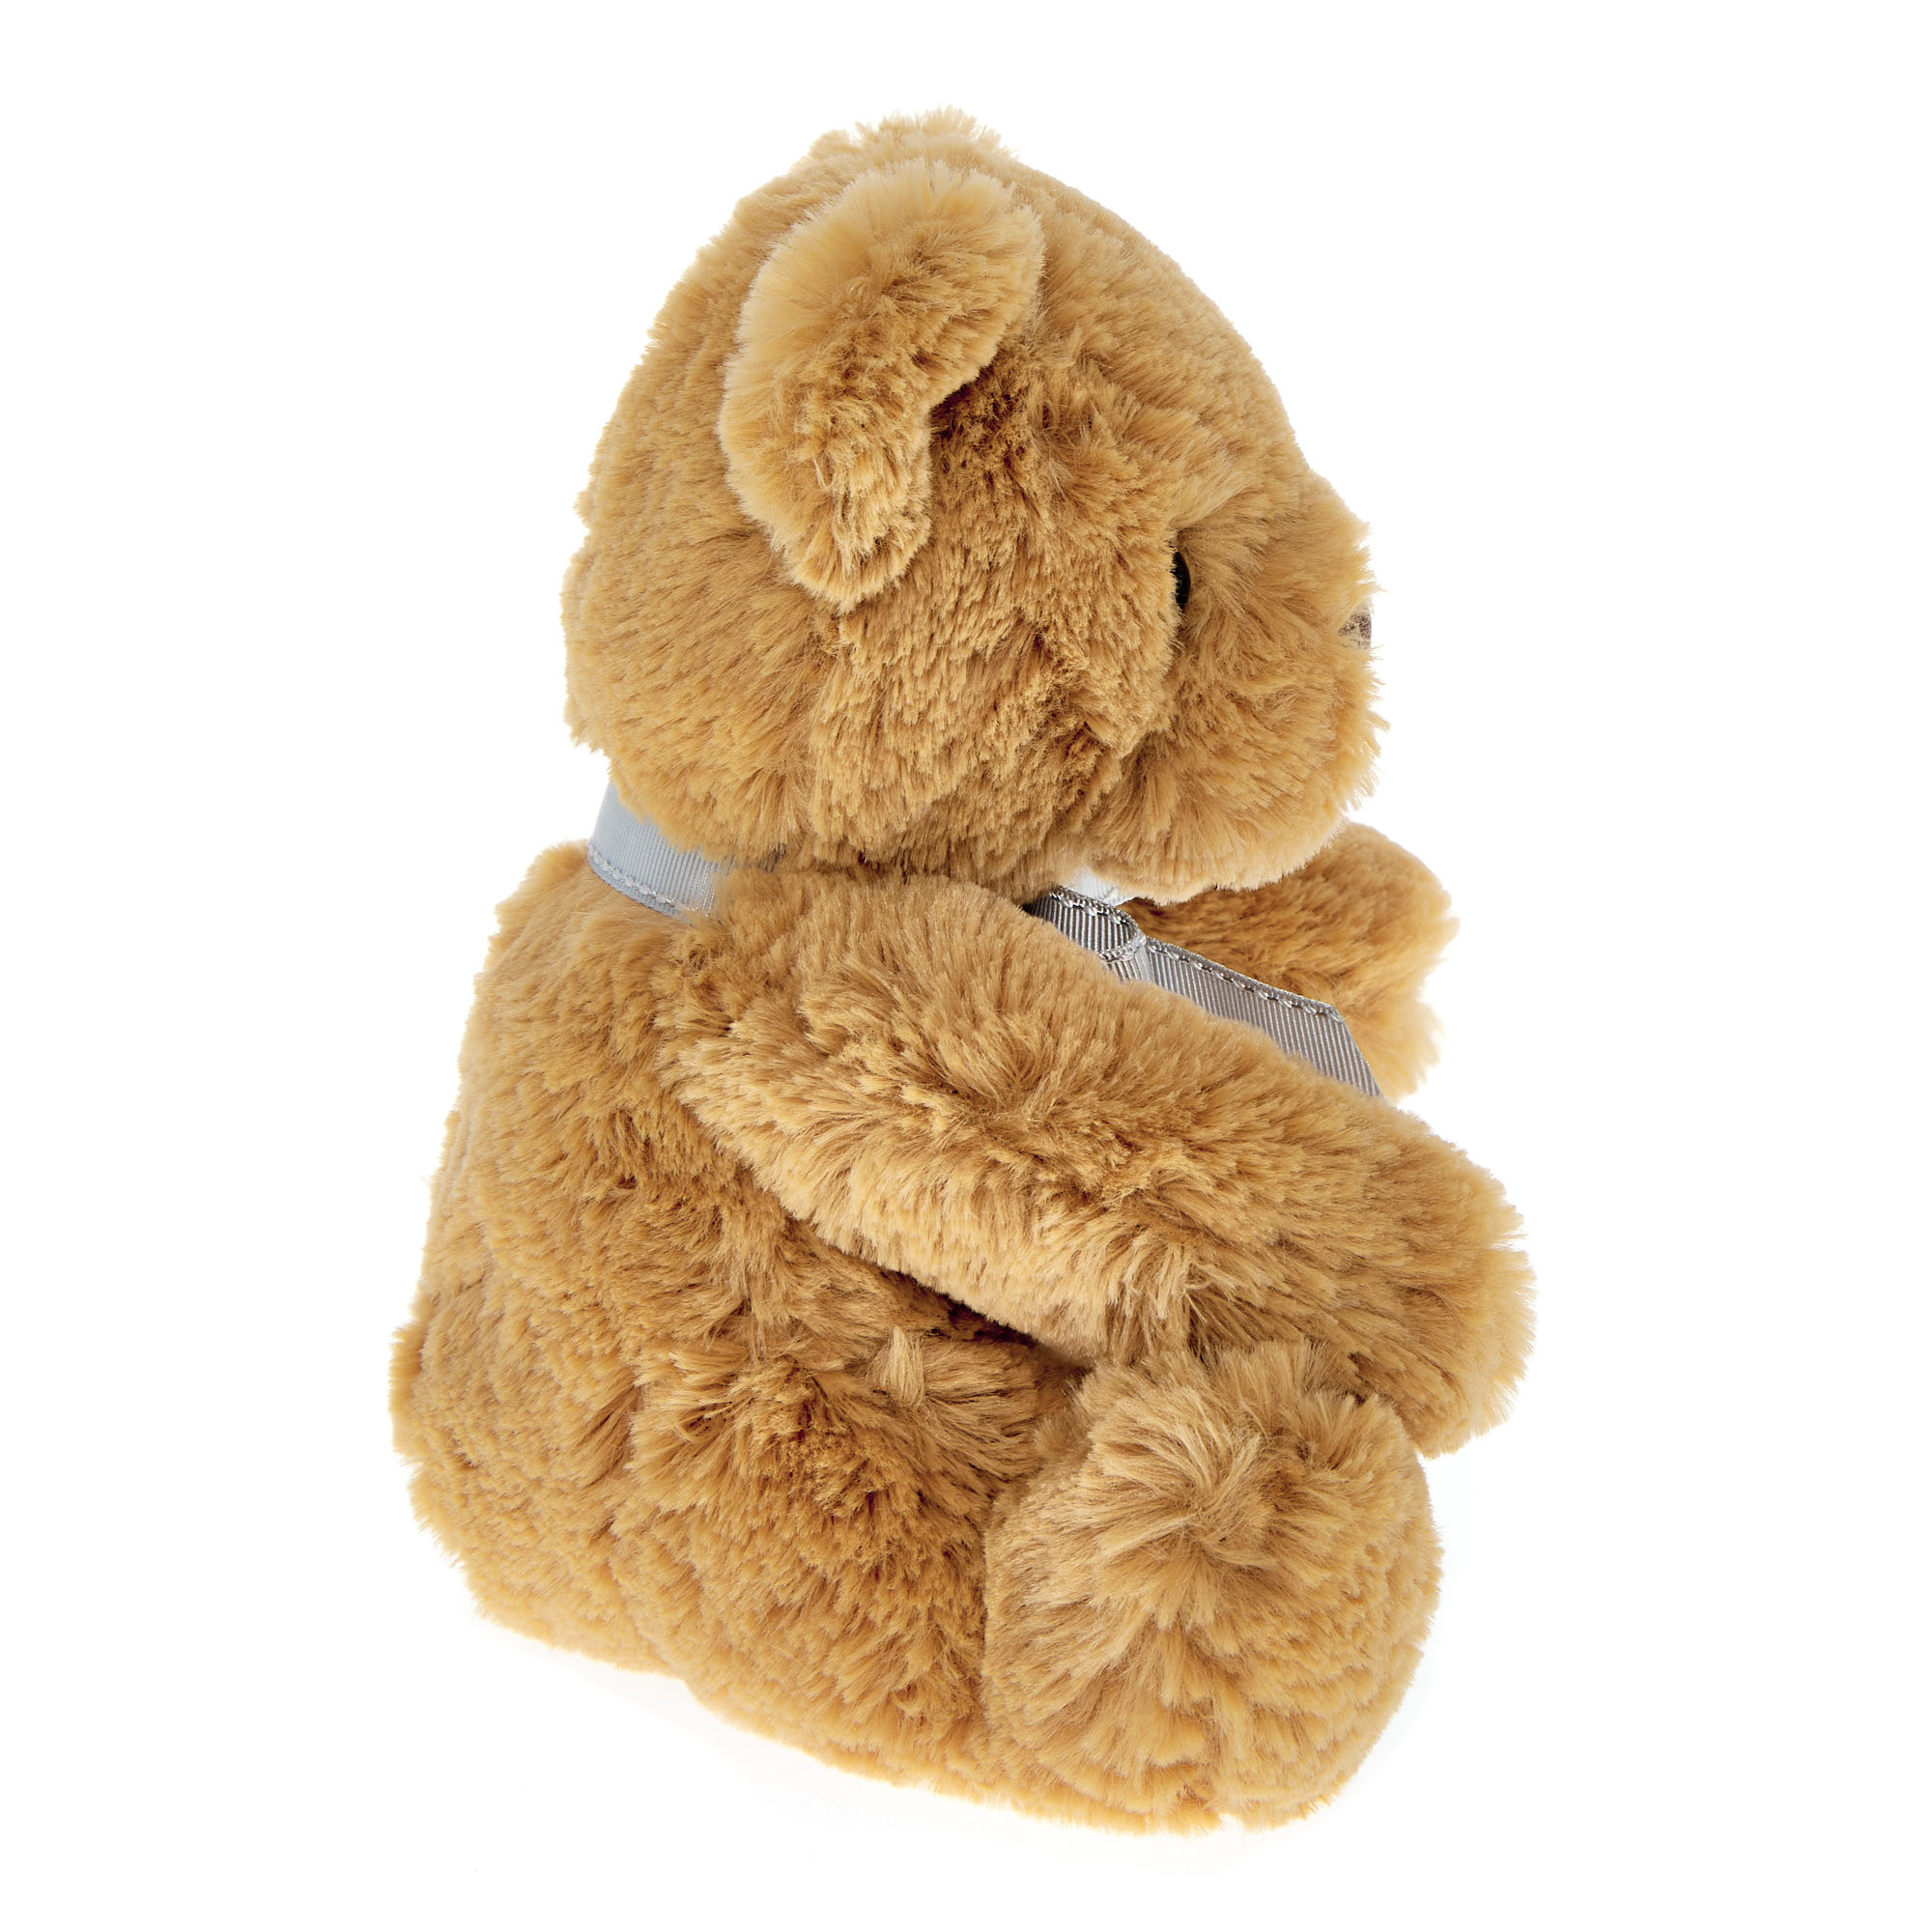 Small Classic Brown Bear Soft Toy